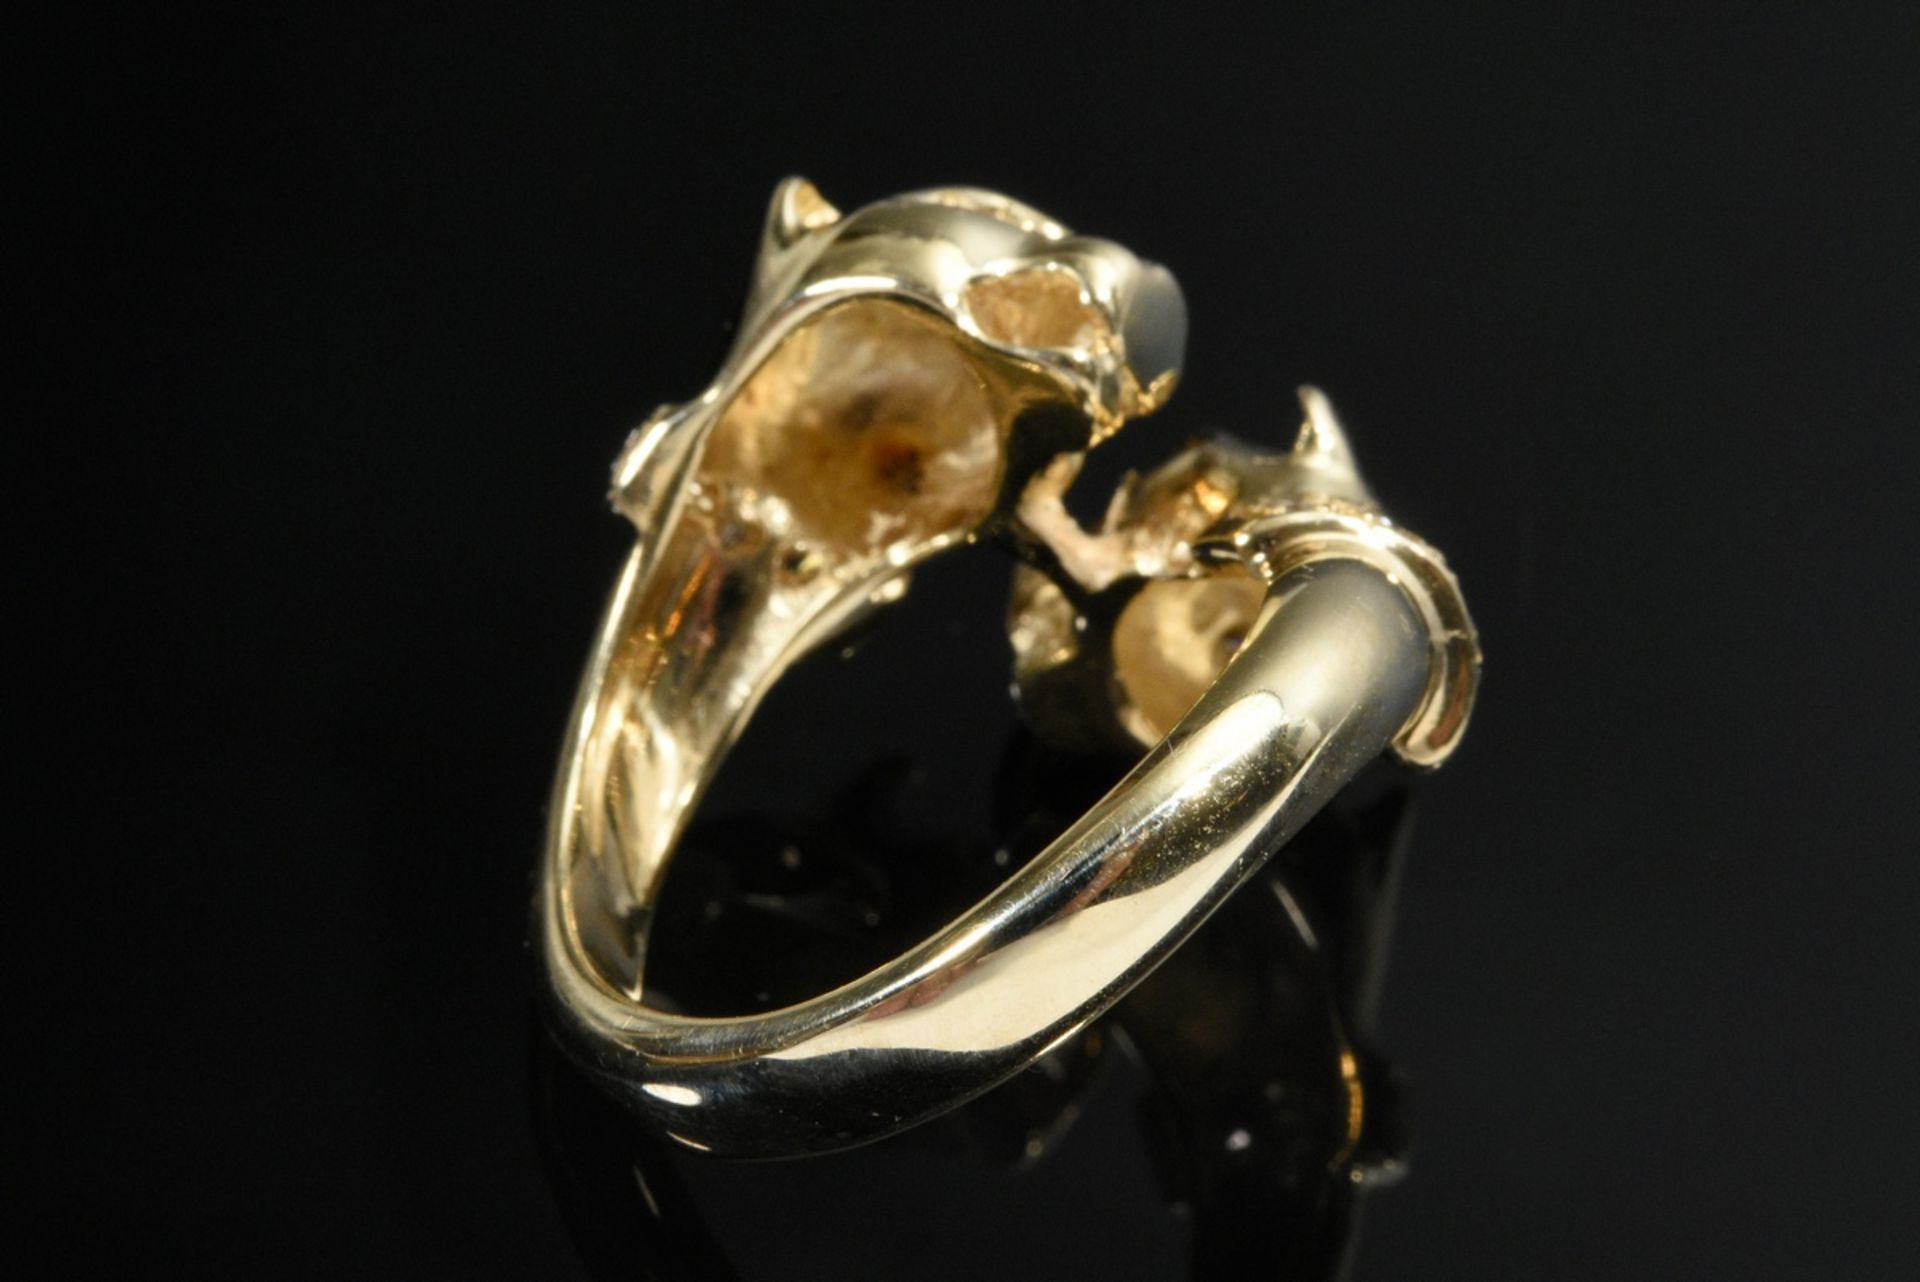 Yellow gold 585 ring made of 2 panther heads looking at each other with diamond eyes and collars (t - Image 4 of 4